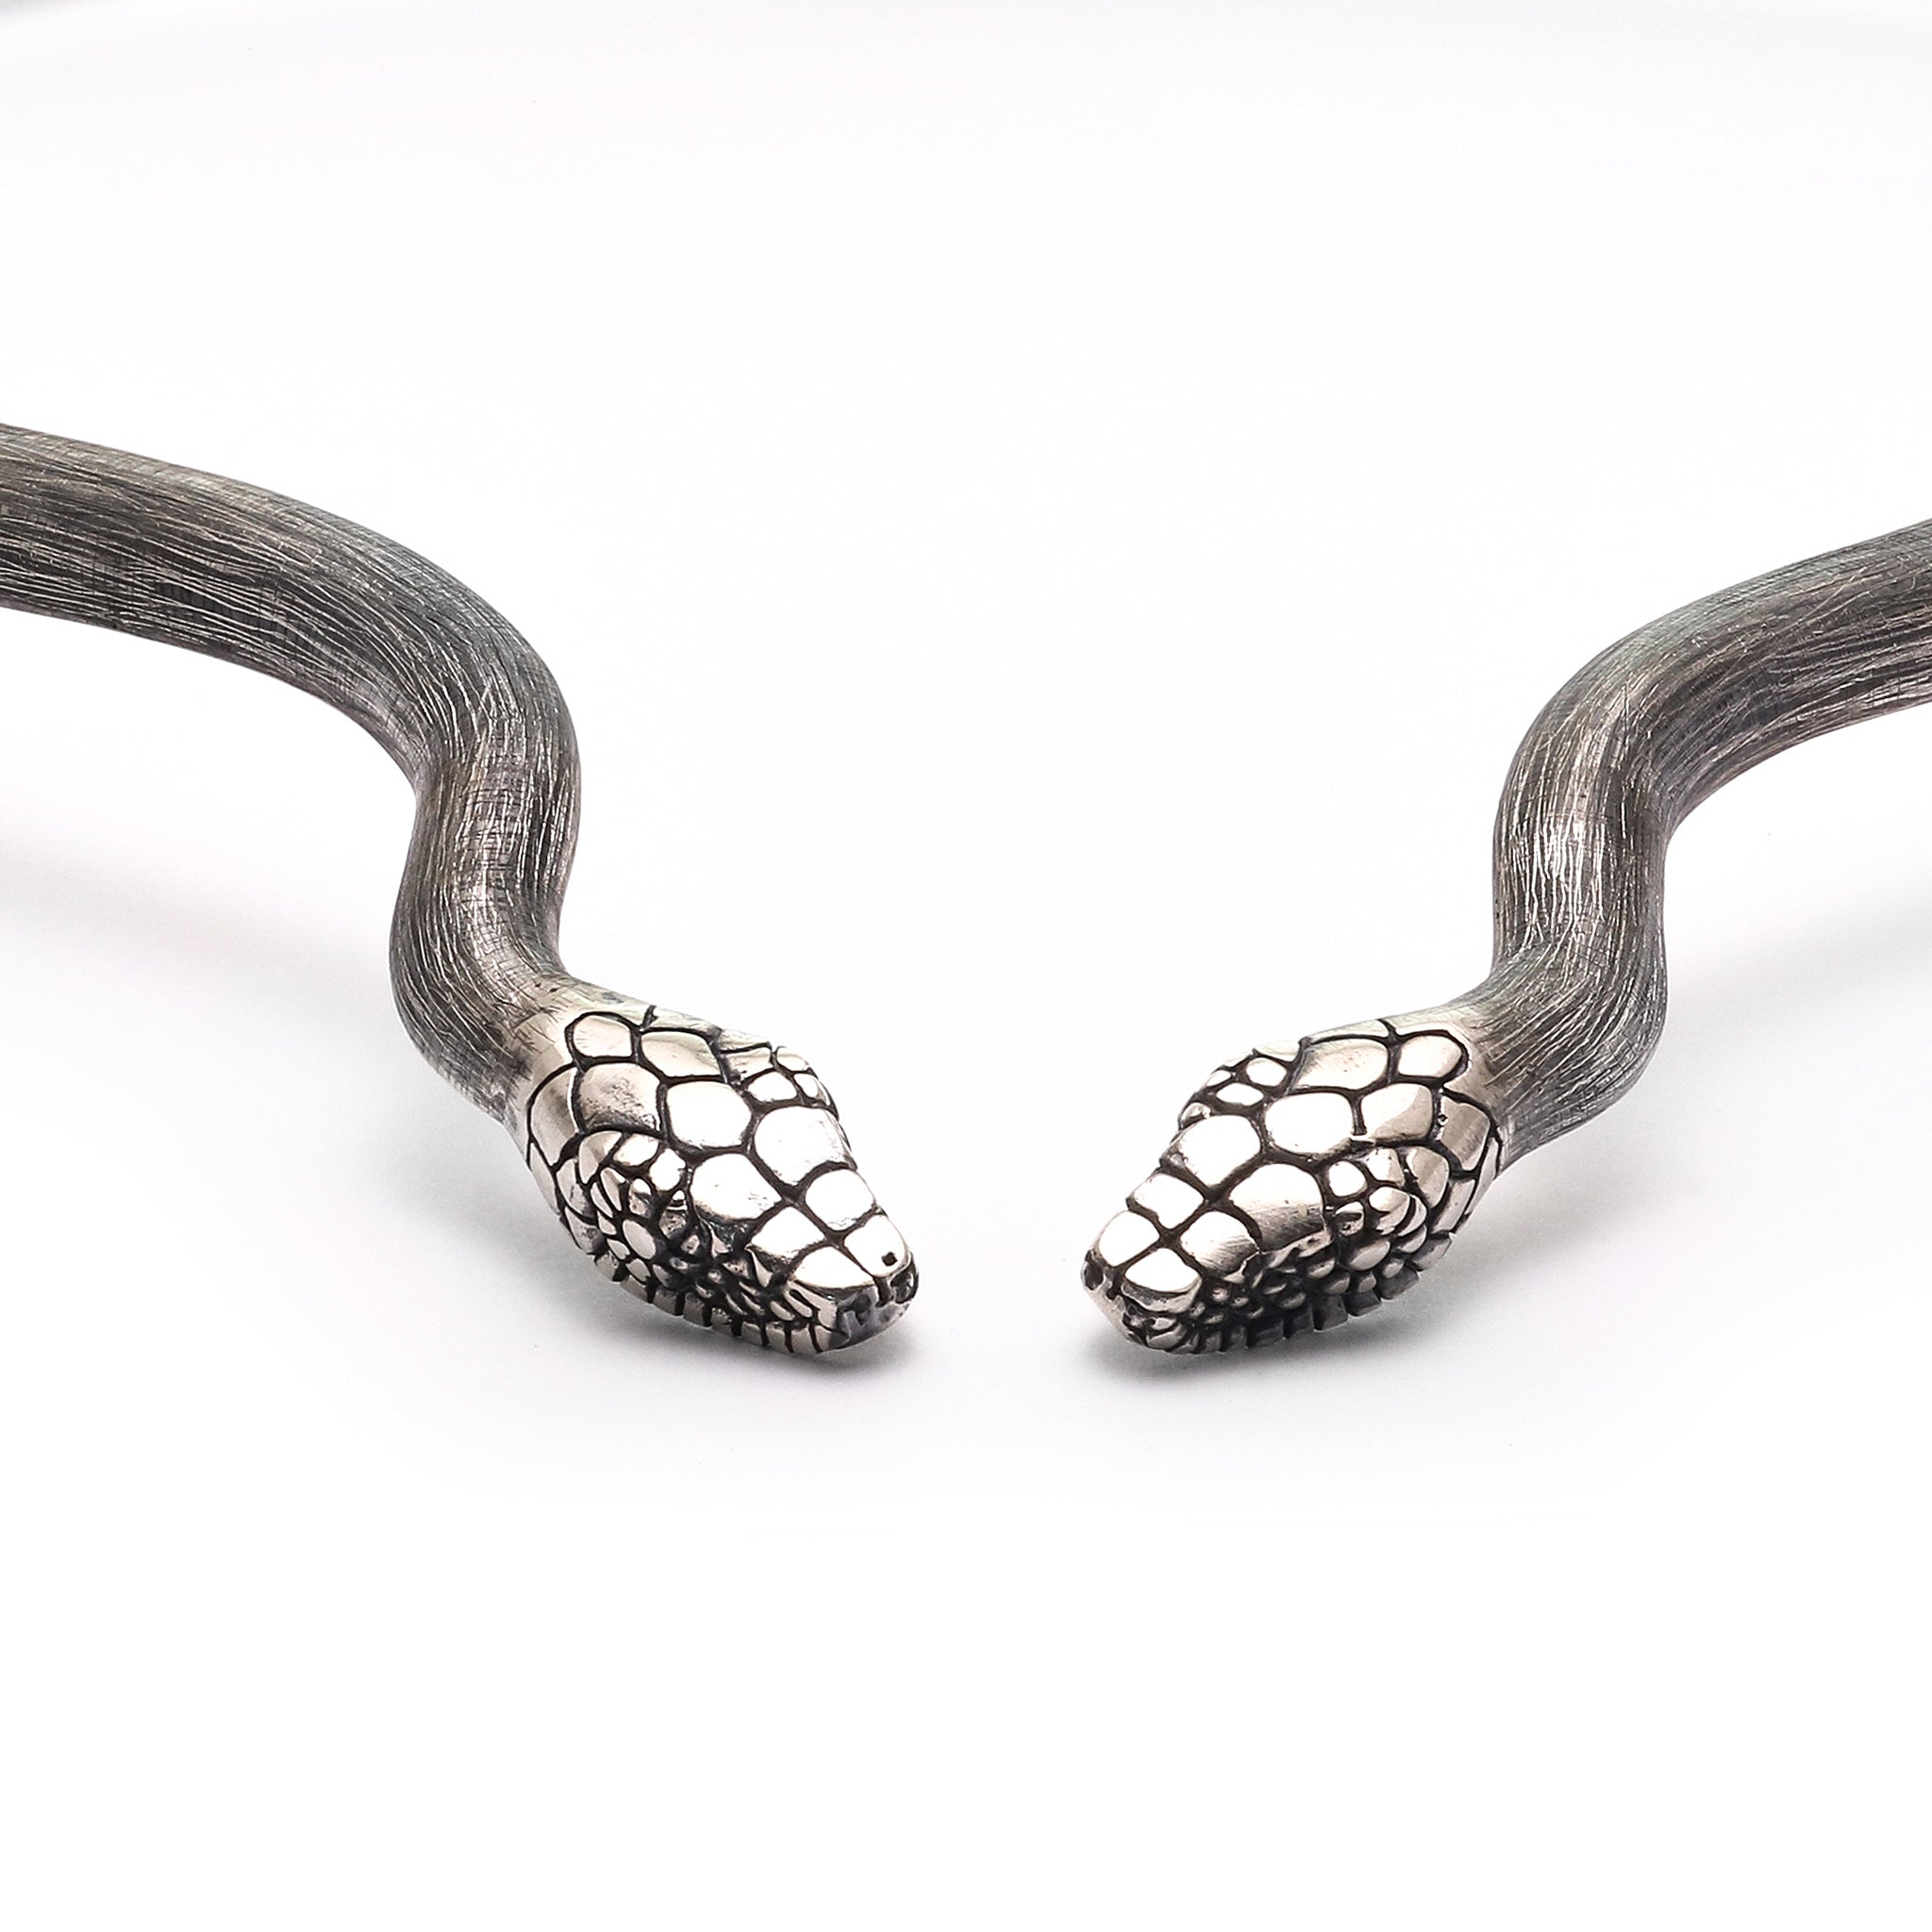 Embraced Collar- Hinged Serpentine Form Necklace